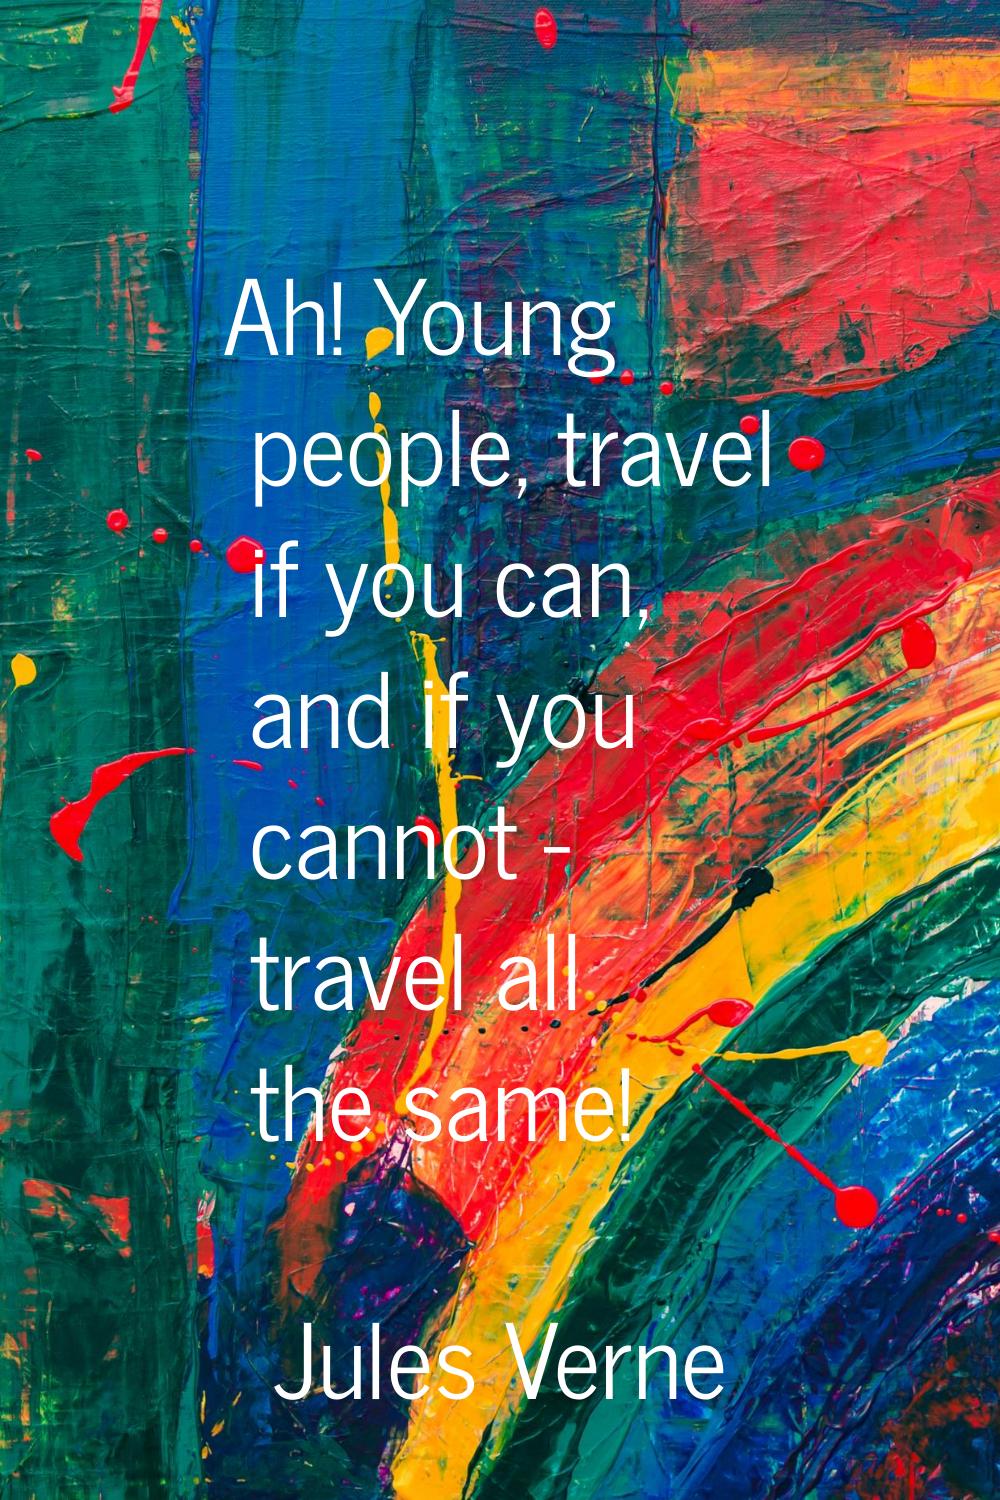 Ah! Young people, travel if you can, and if you cannot - travel all the same!